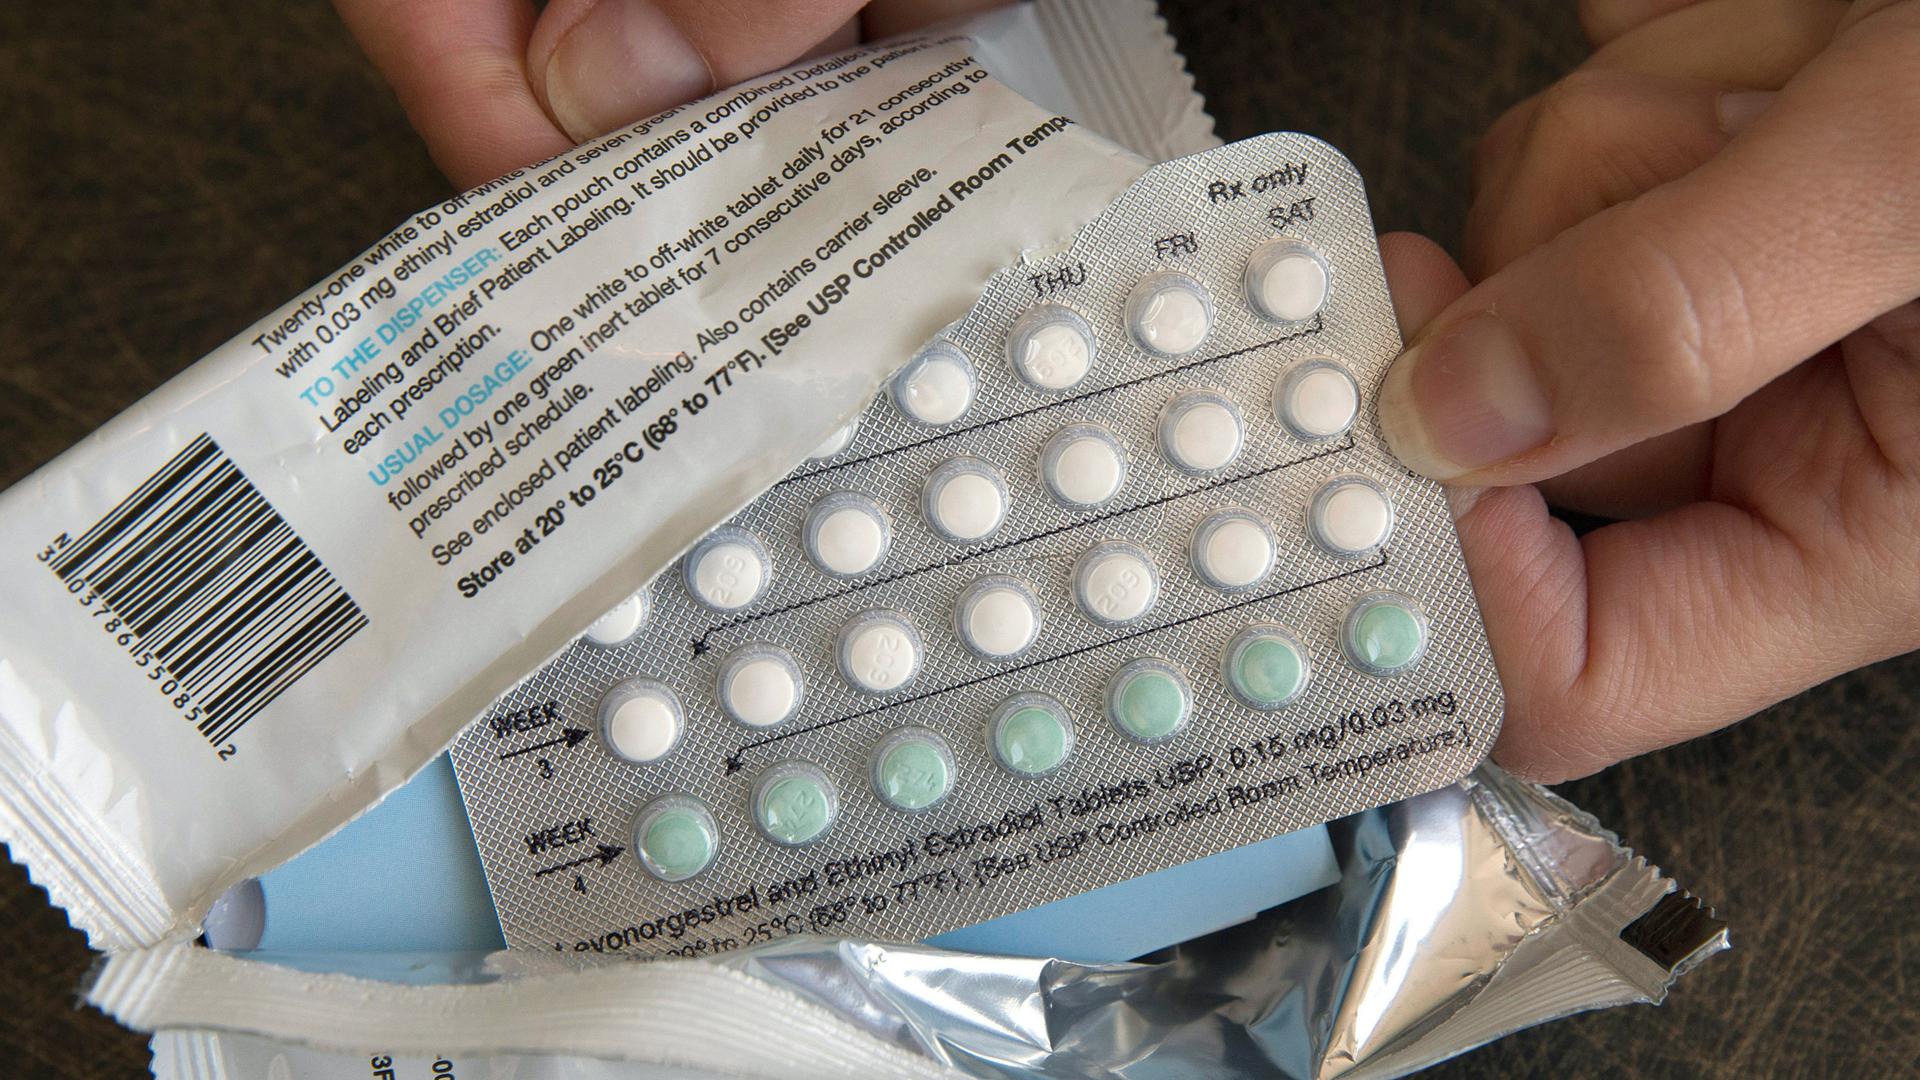 A one-month dosage of hormonal birth control pills is displayed. Early-stage abortions are legal in Thailand, but many doctors and nurses there refuse to do them.